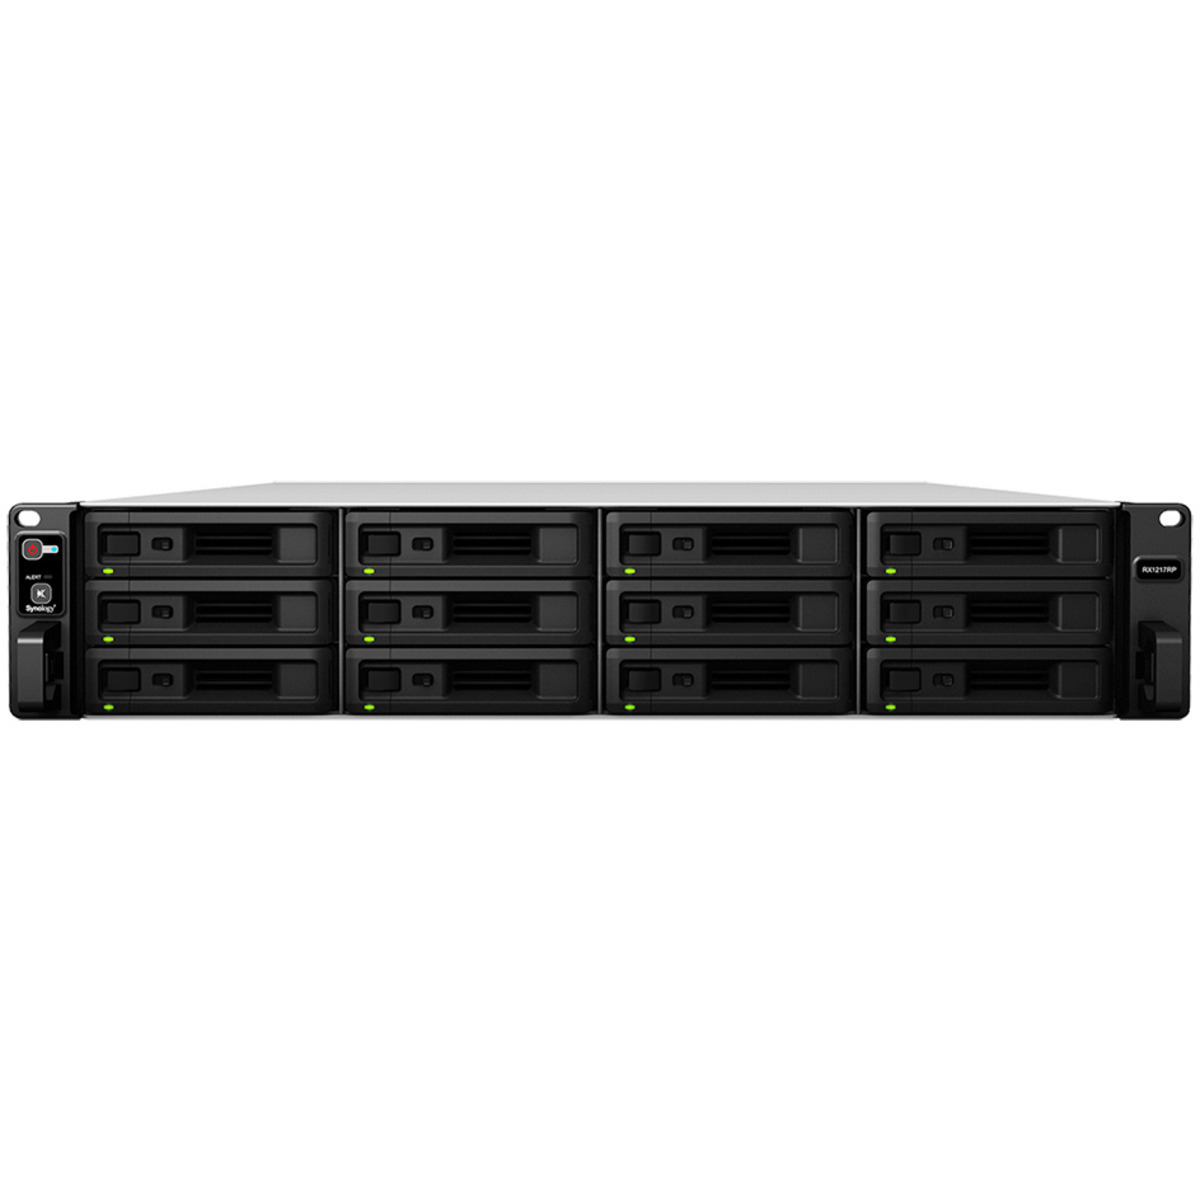 buy $8199 Synology RX1217RP 144tb RackMount Expansion Enclosure 12x12000gb Seagate IronWolf Pro ST12000NE0008 3.5 7200rpm SATA 6Gb/s HDD NAS Class Drives Installed - Burn-In Tested - nas headquarters buy network attached storage server device das new raid-5 free shipping usa christmas new year holiday sale RX1217RP